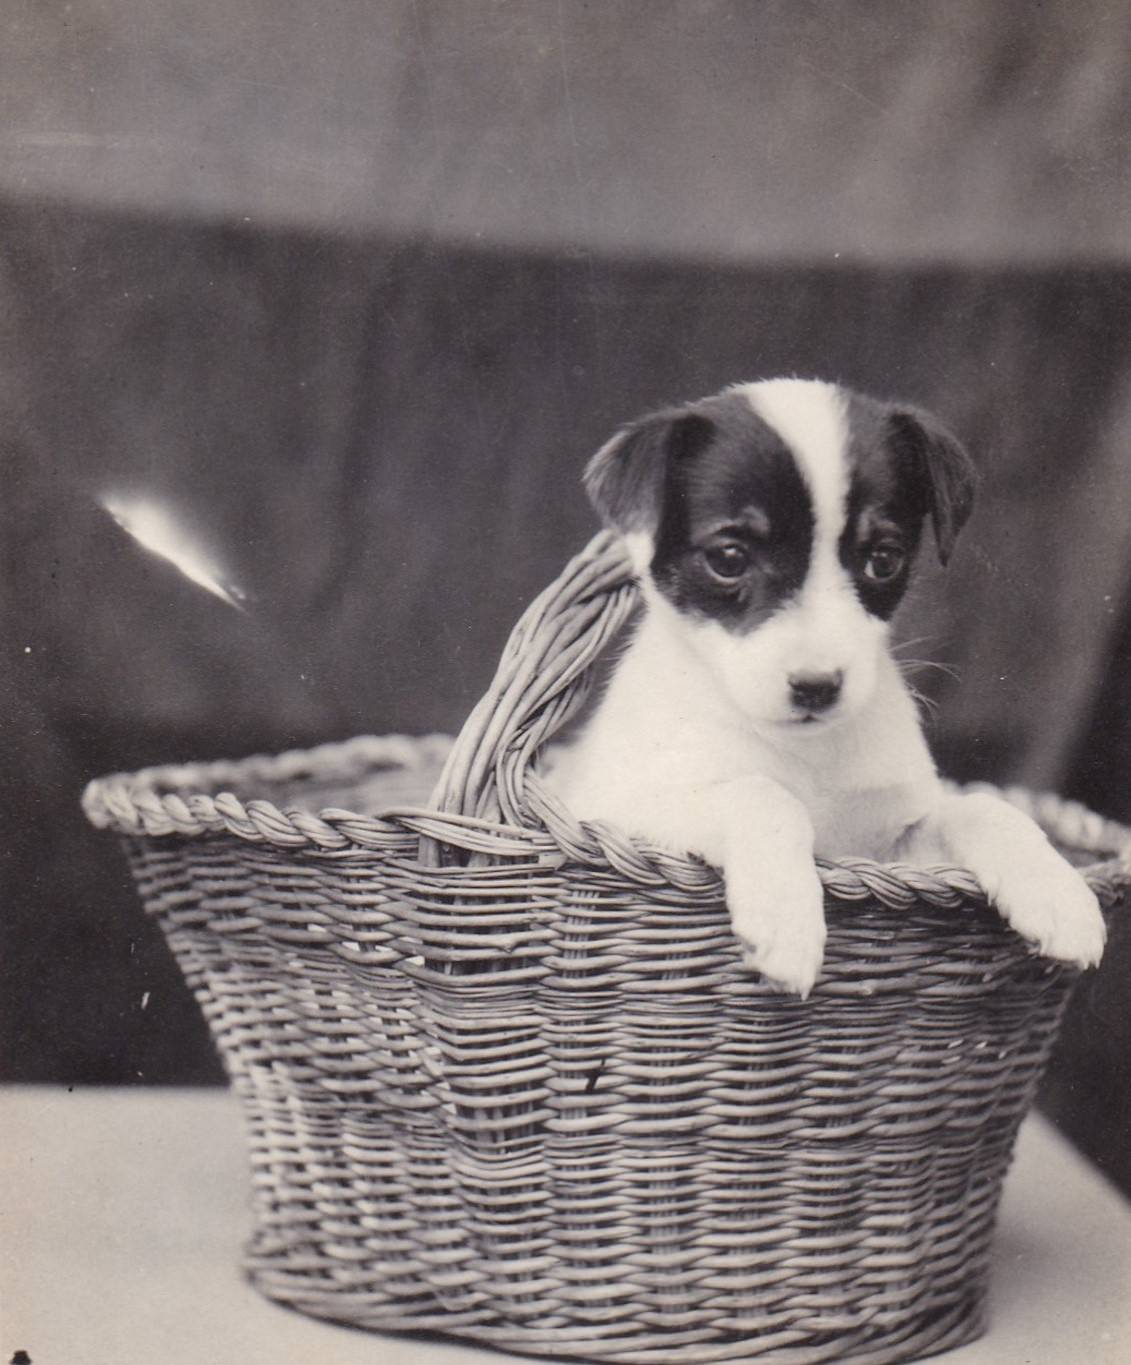 24 Cute and Adorable Vintage Photos from the Past that will Brighten Your Day